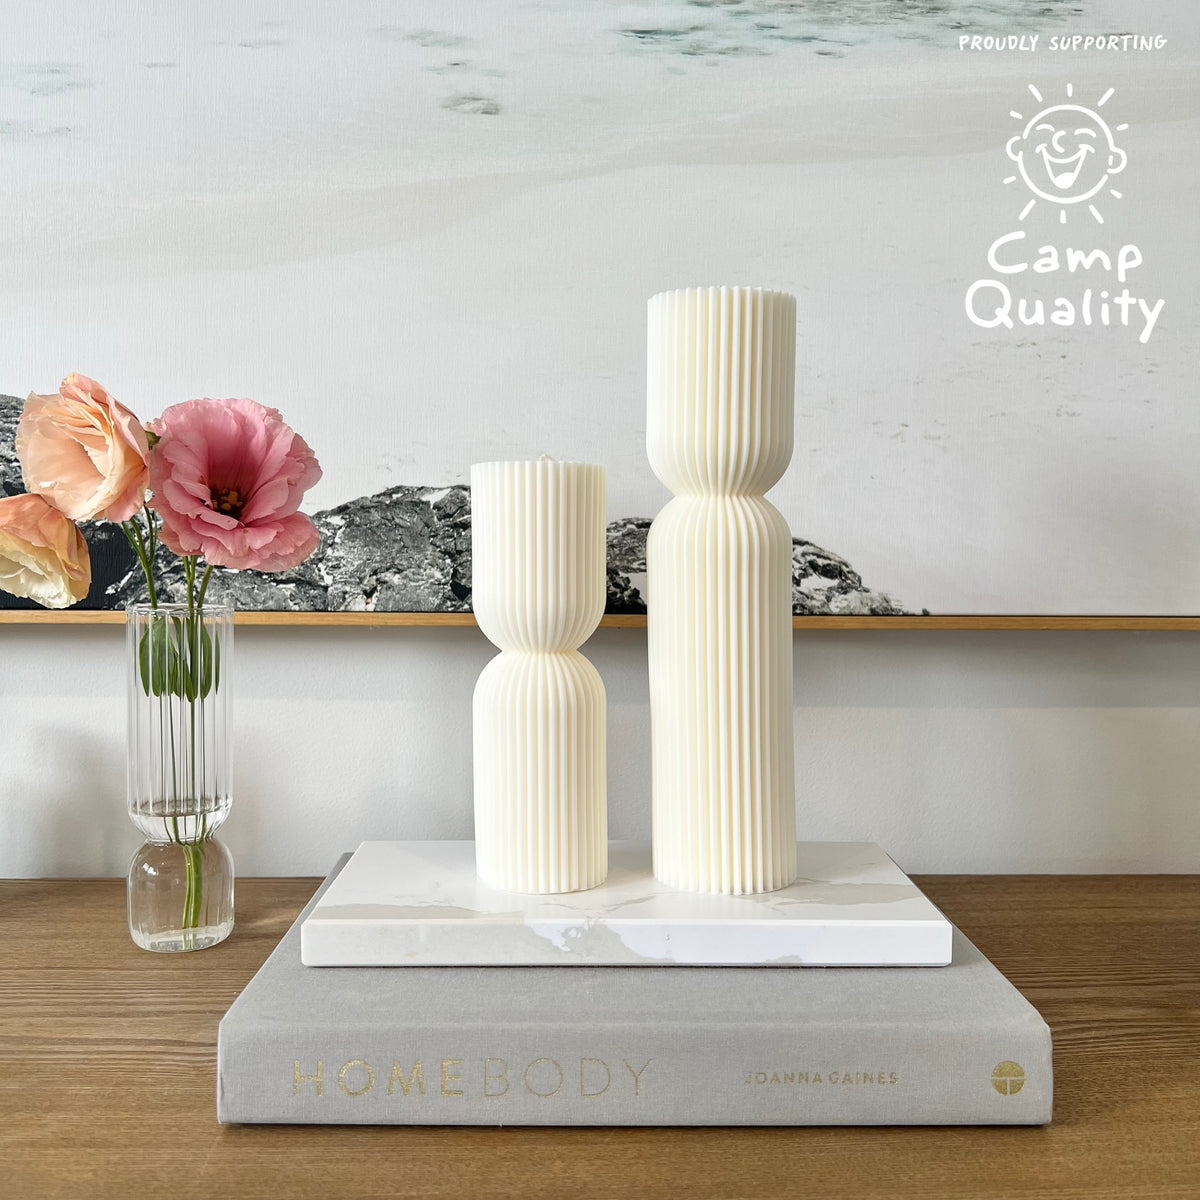 Caesarstone Calacutta Maximus Candle Tray with Studio McKenna Esther & Harper Candles. Natural Soy Wax, hand poured in Melbourne, Australia.